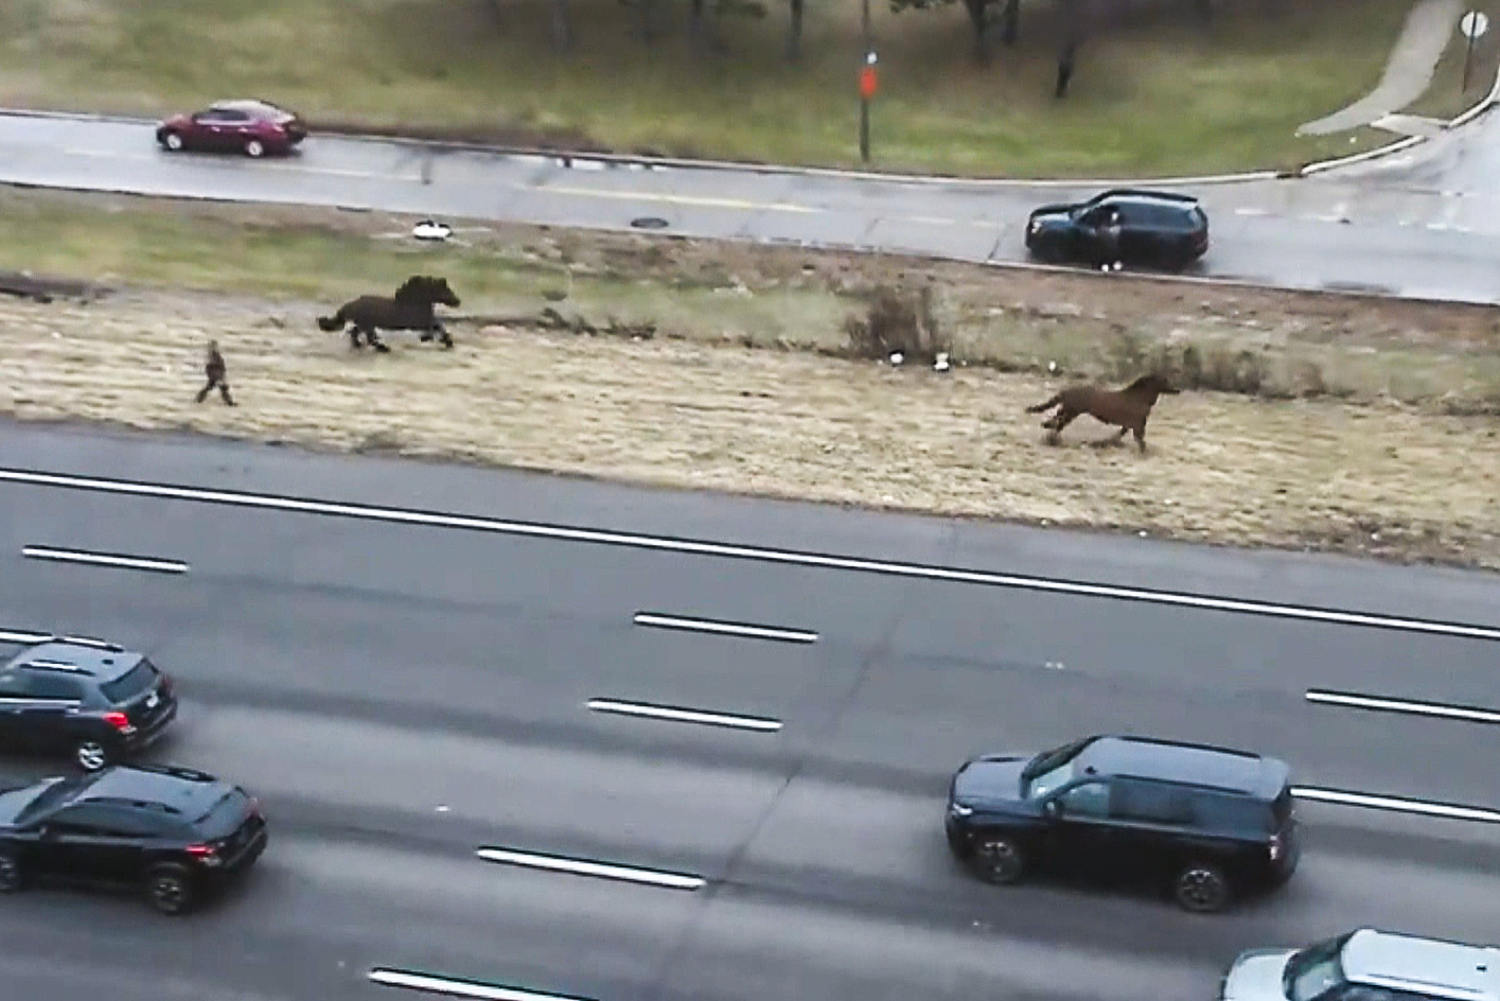 Video shows 2 Cleveland police horses on the lam causing traffic jam on I-90 